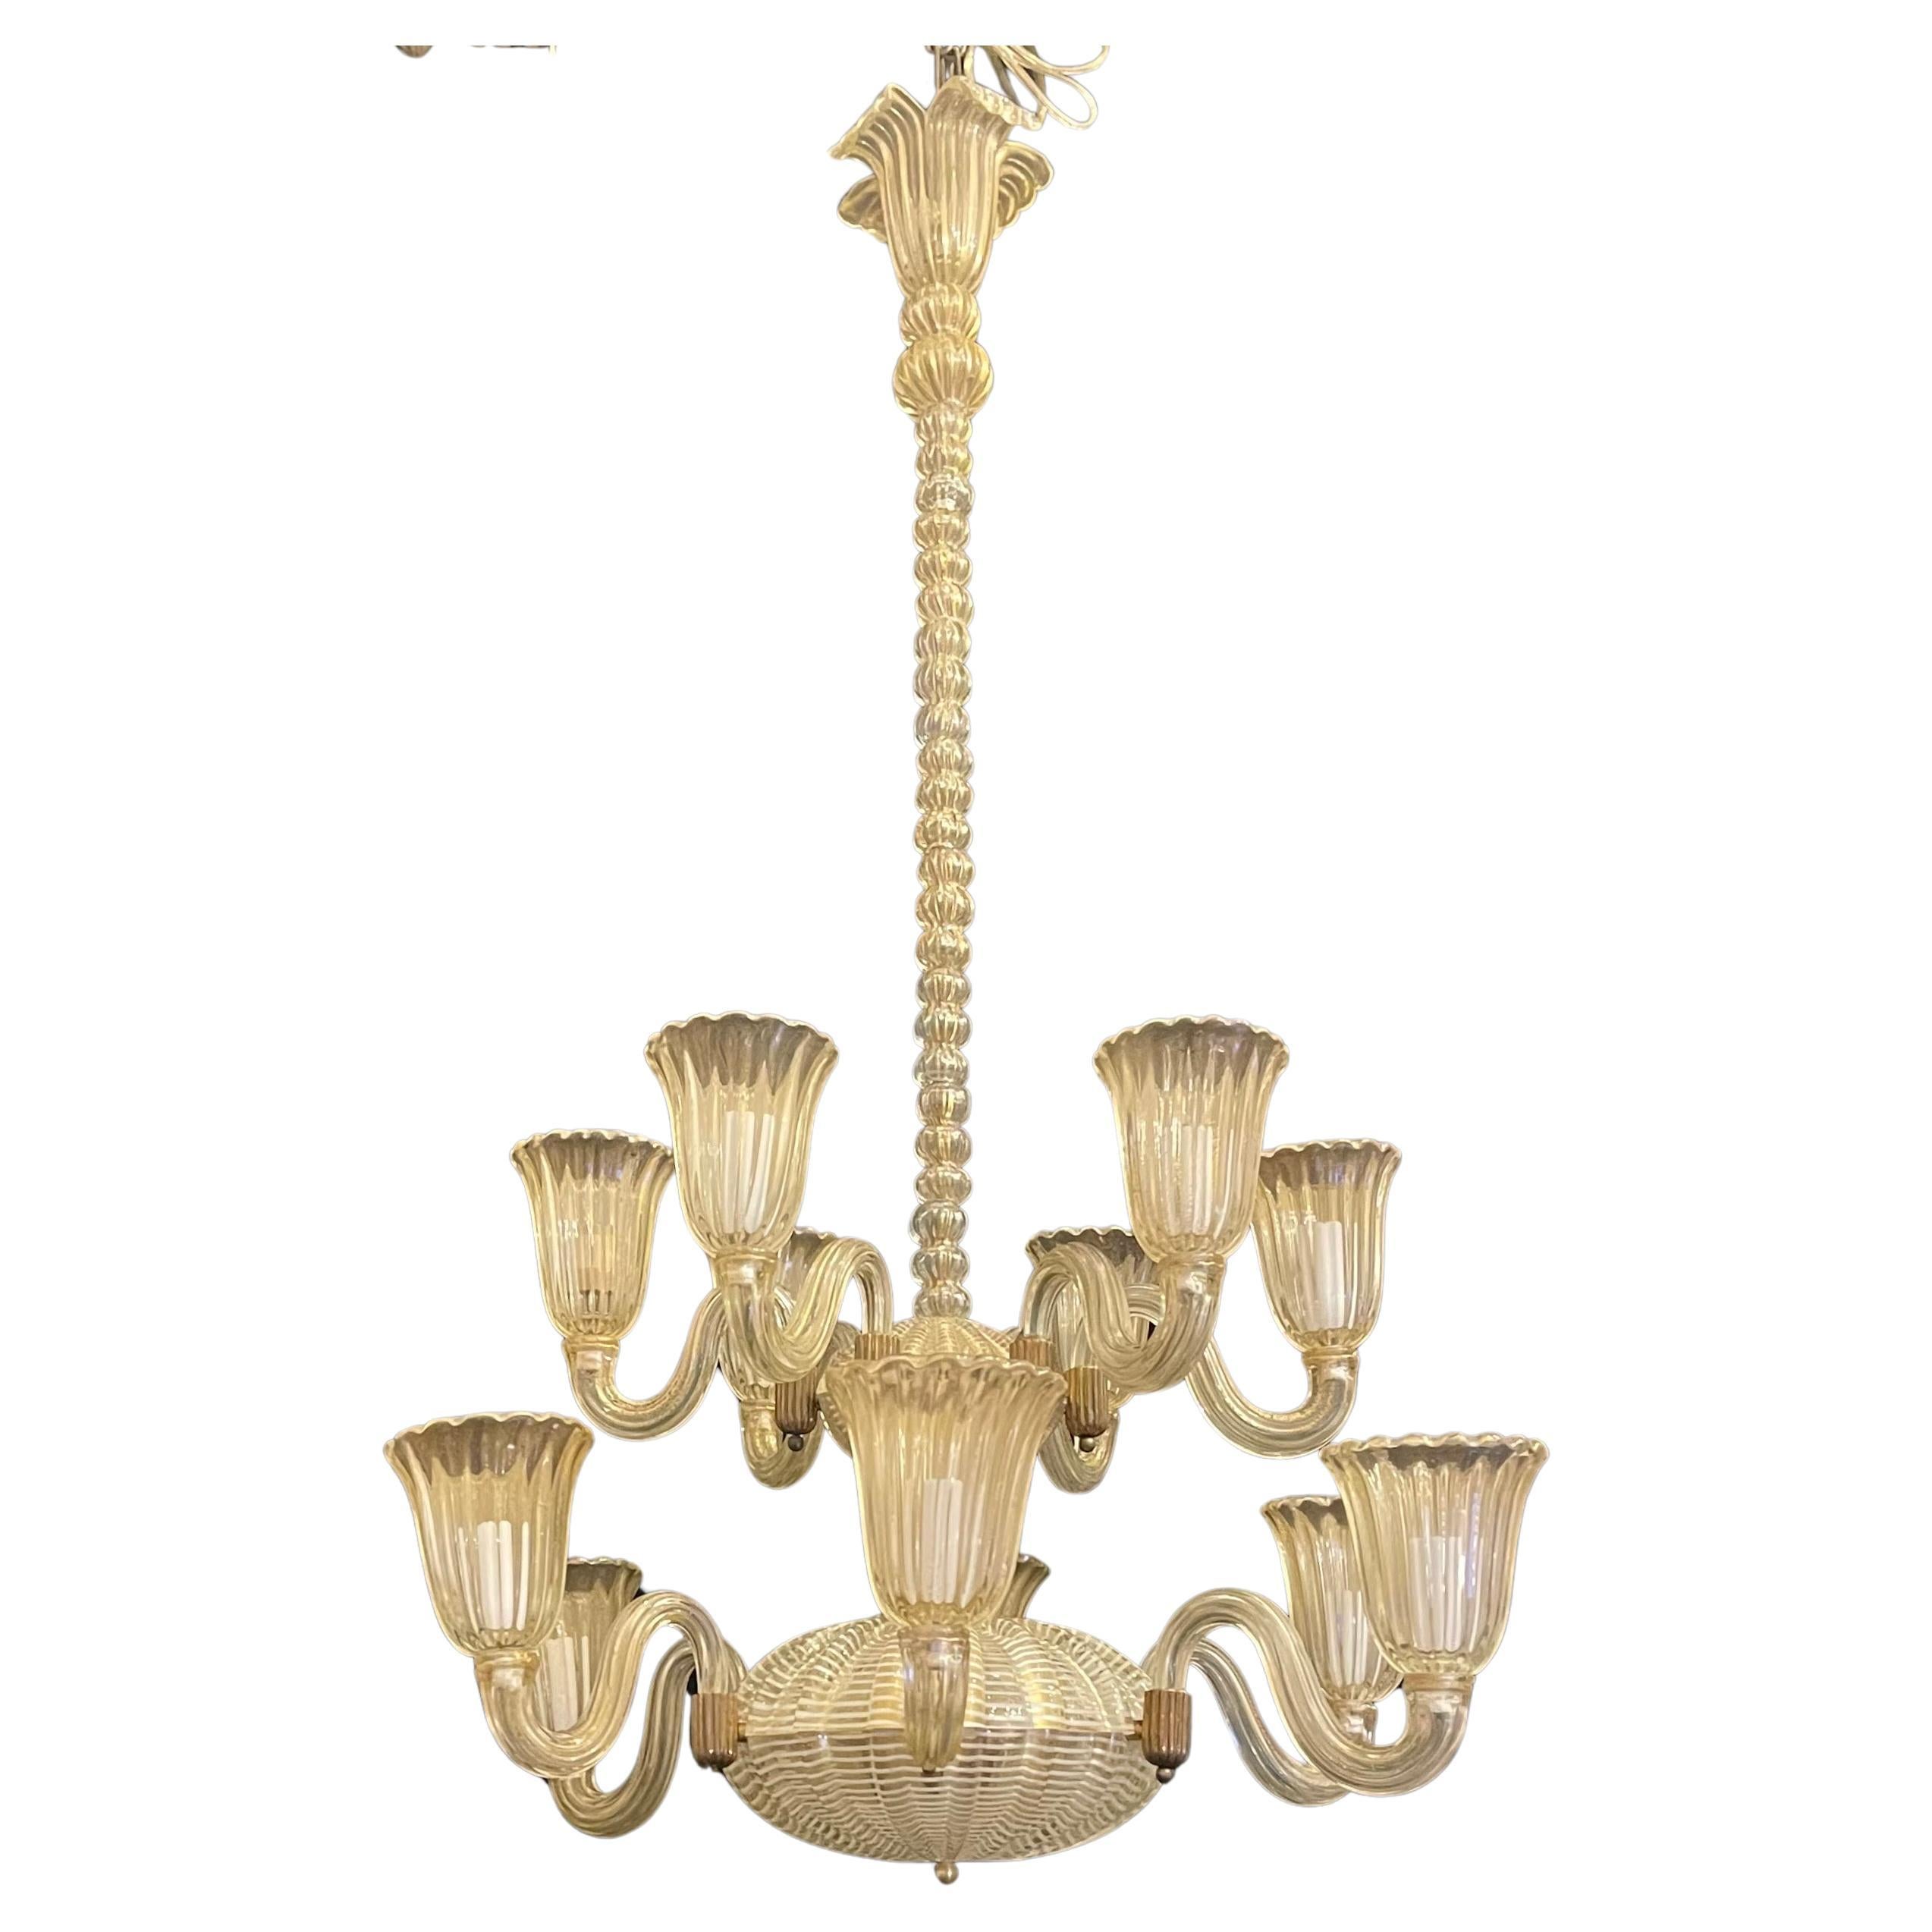 A Wonderful Vintage Mid-Century Modern Retailed By Lorin Marsh, Gold Flake and Ribbed Murano Blown Art Glass Chandelier Rewired With 12 Candelabra Lights In The Style Of Barovier Seguso & Ferro
One Arm Under The Cup Has Been Professionally